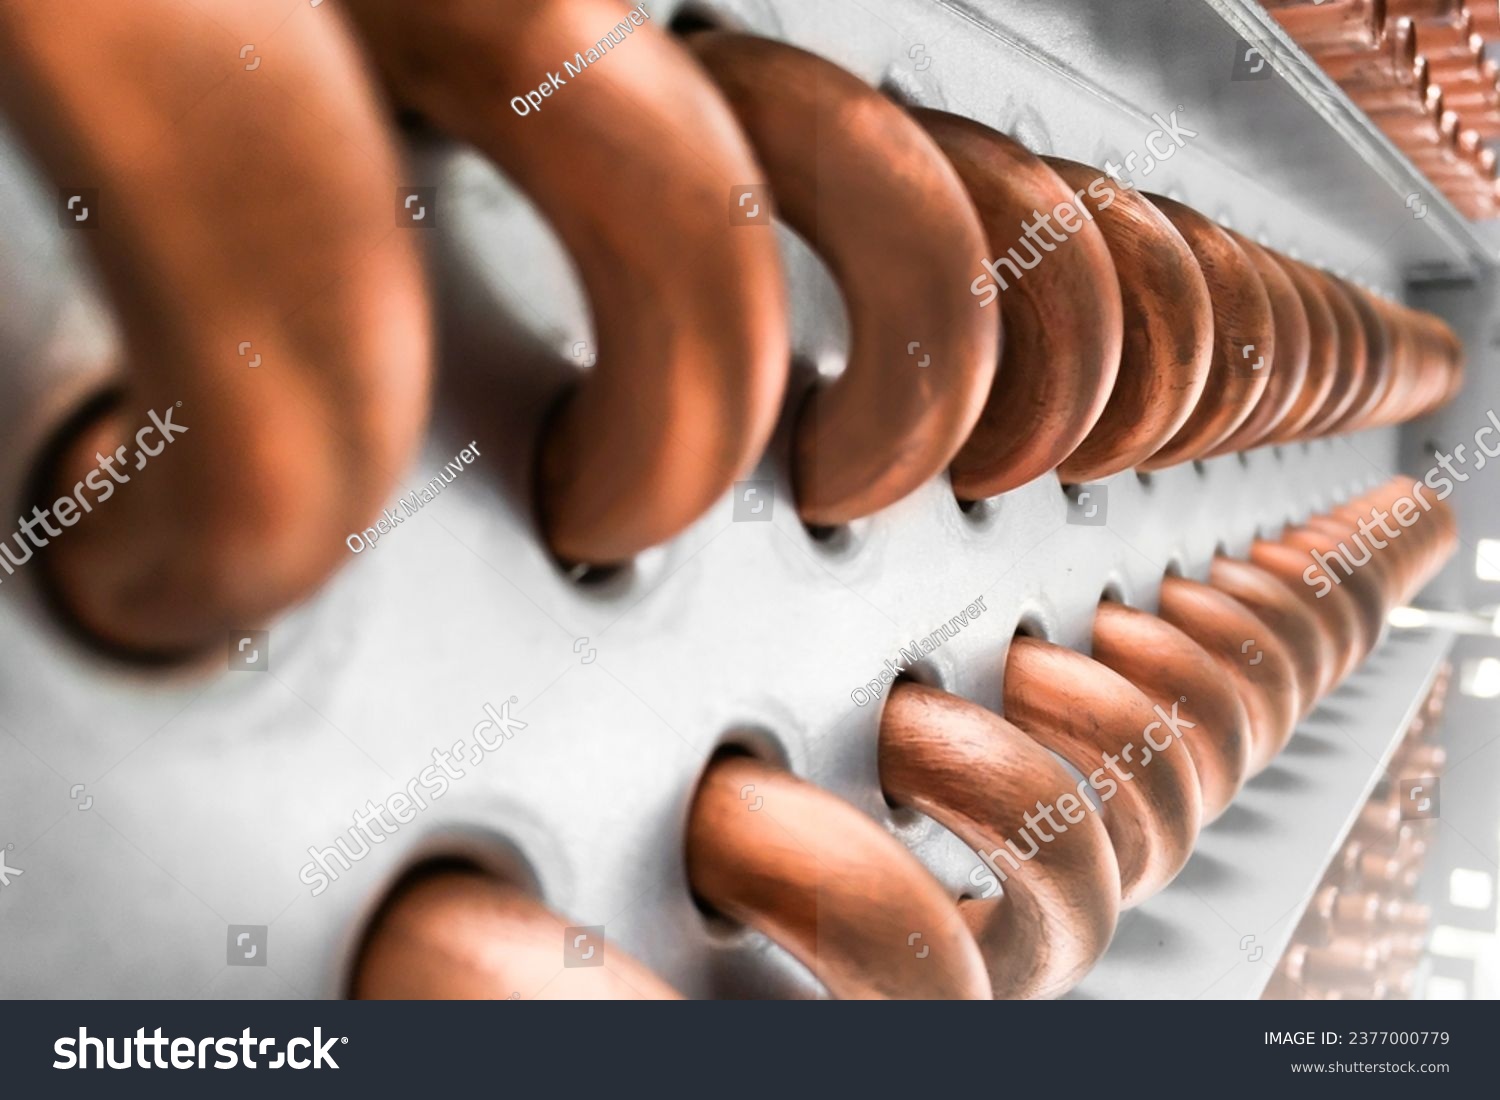 Capturing the Fine Details of an Evaporator Coil in a Close-up Image #2377000779